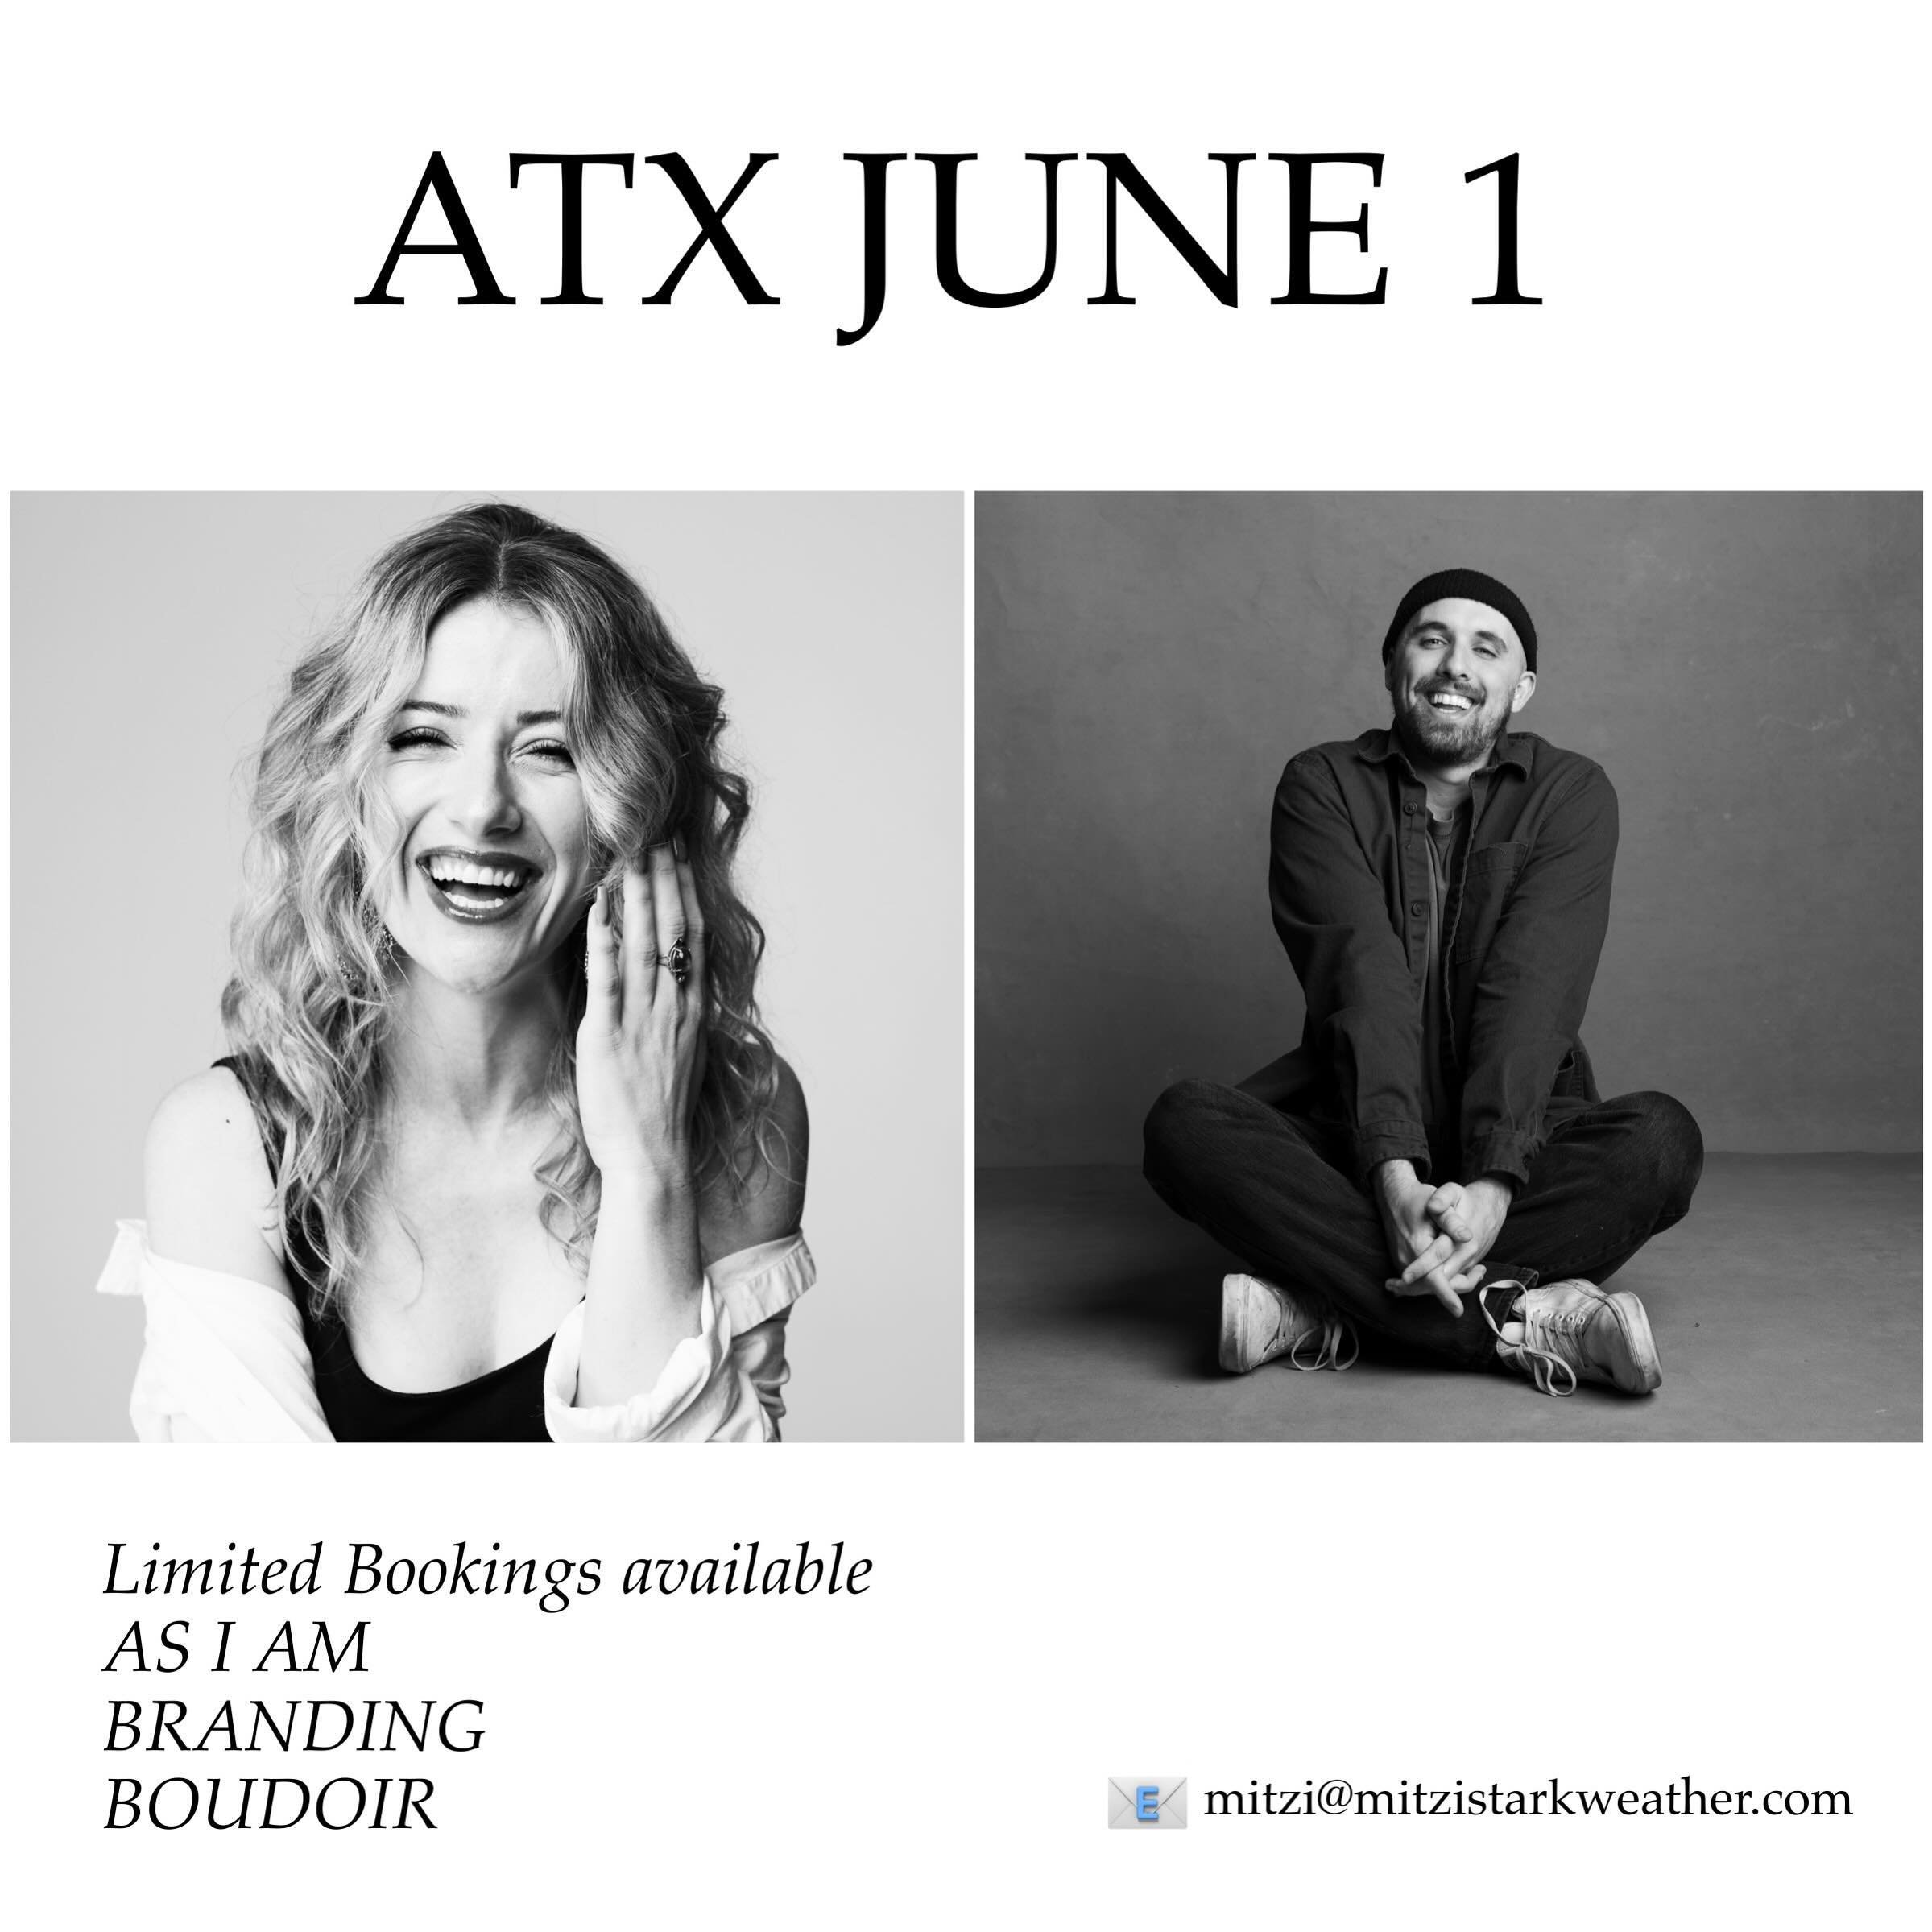 Nbd just bringing my studio (including signature backdrops, etc) to Austin for the first day of June and I&rsquo;d love to get you booked! DM me ATX and I&rsquo;ll send you all the info. This is gonna be soooo fun 🤍